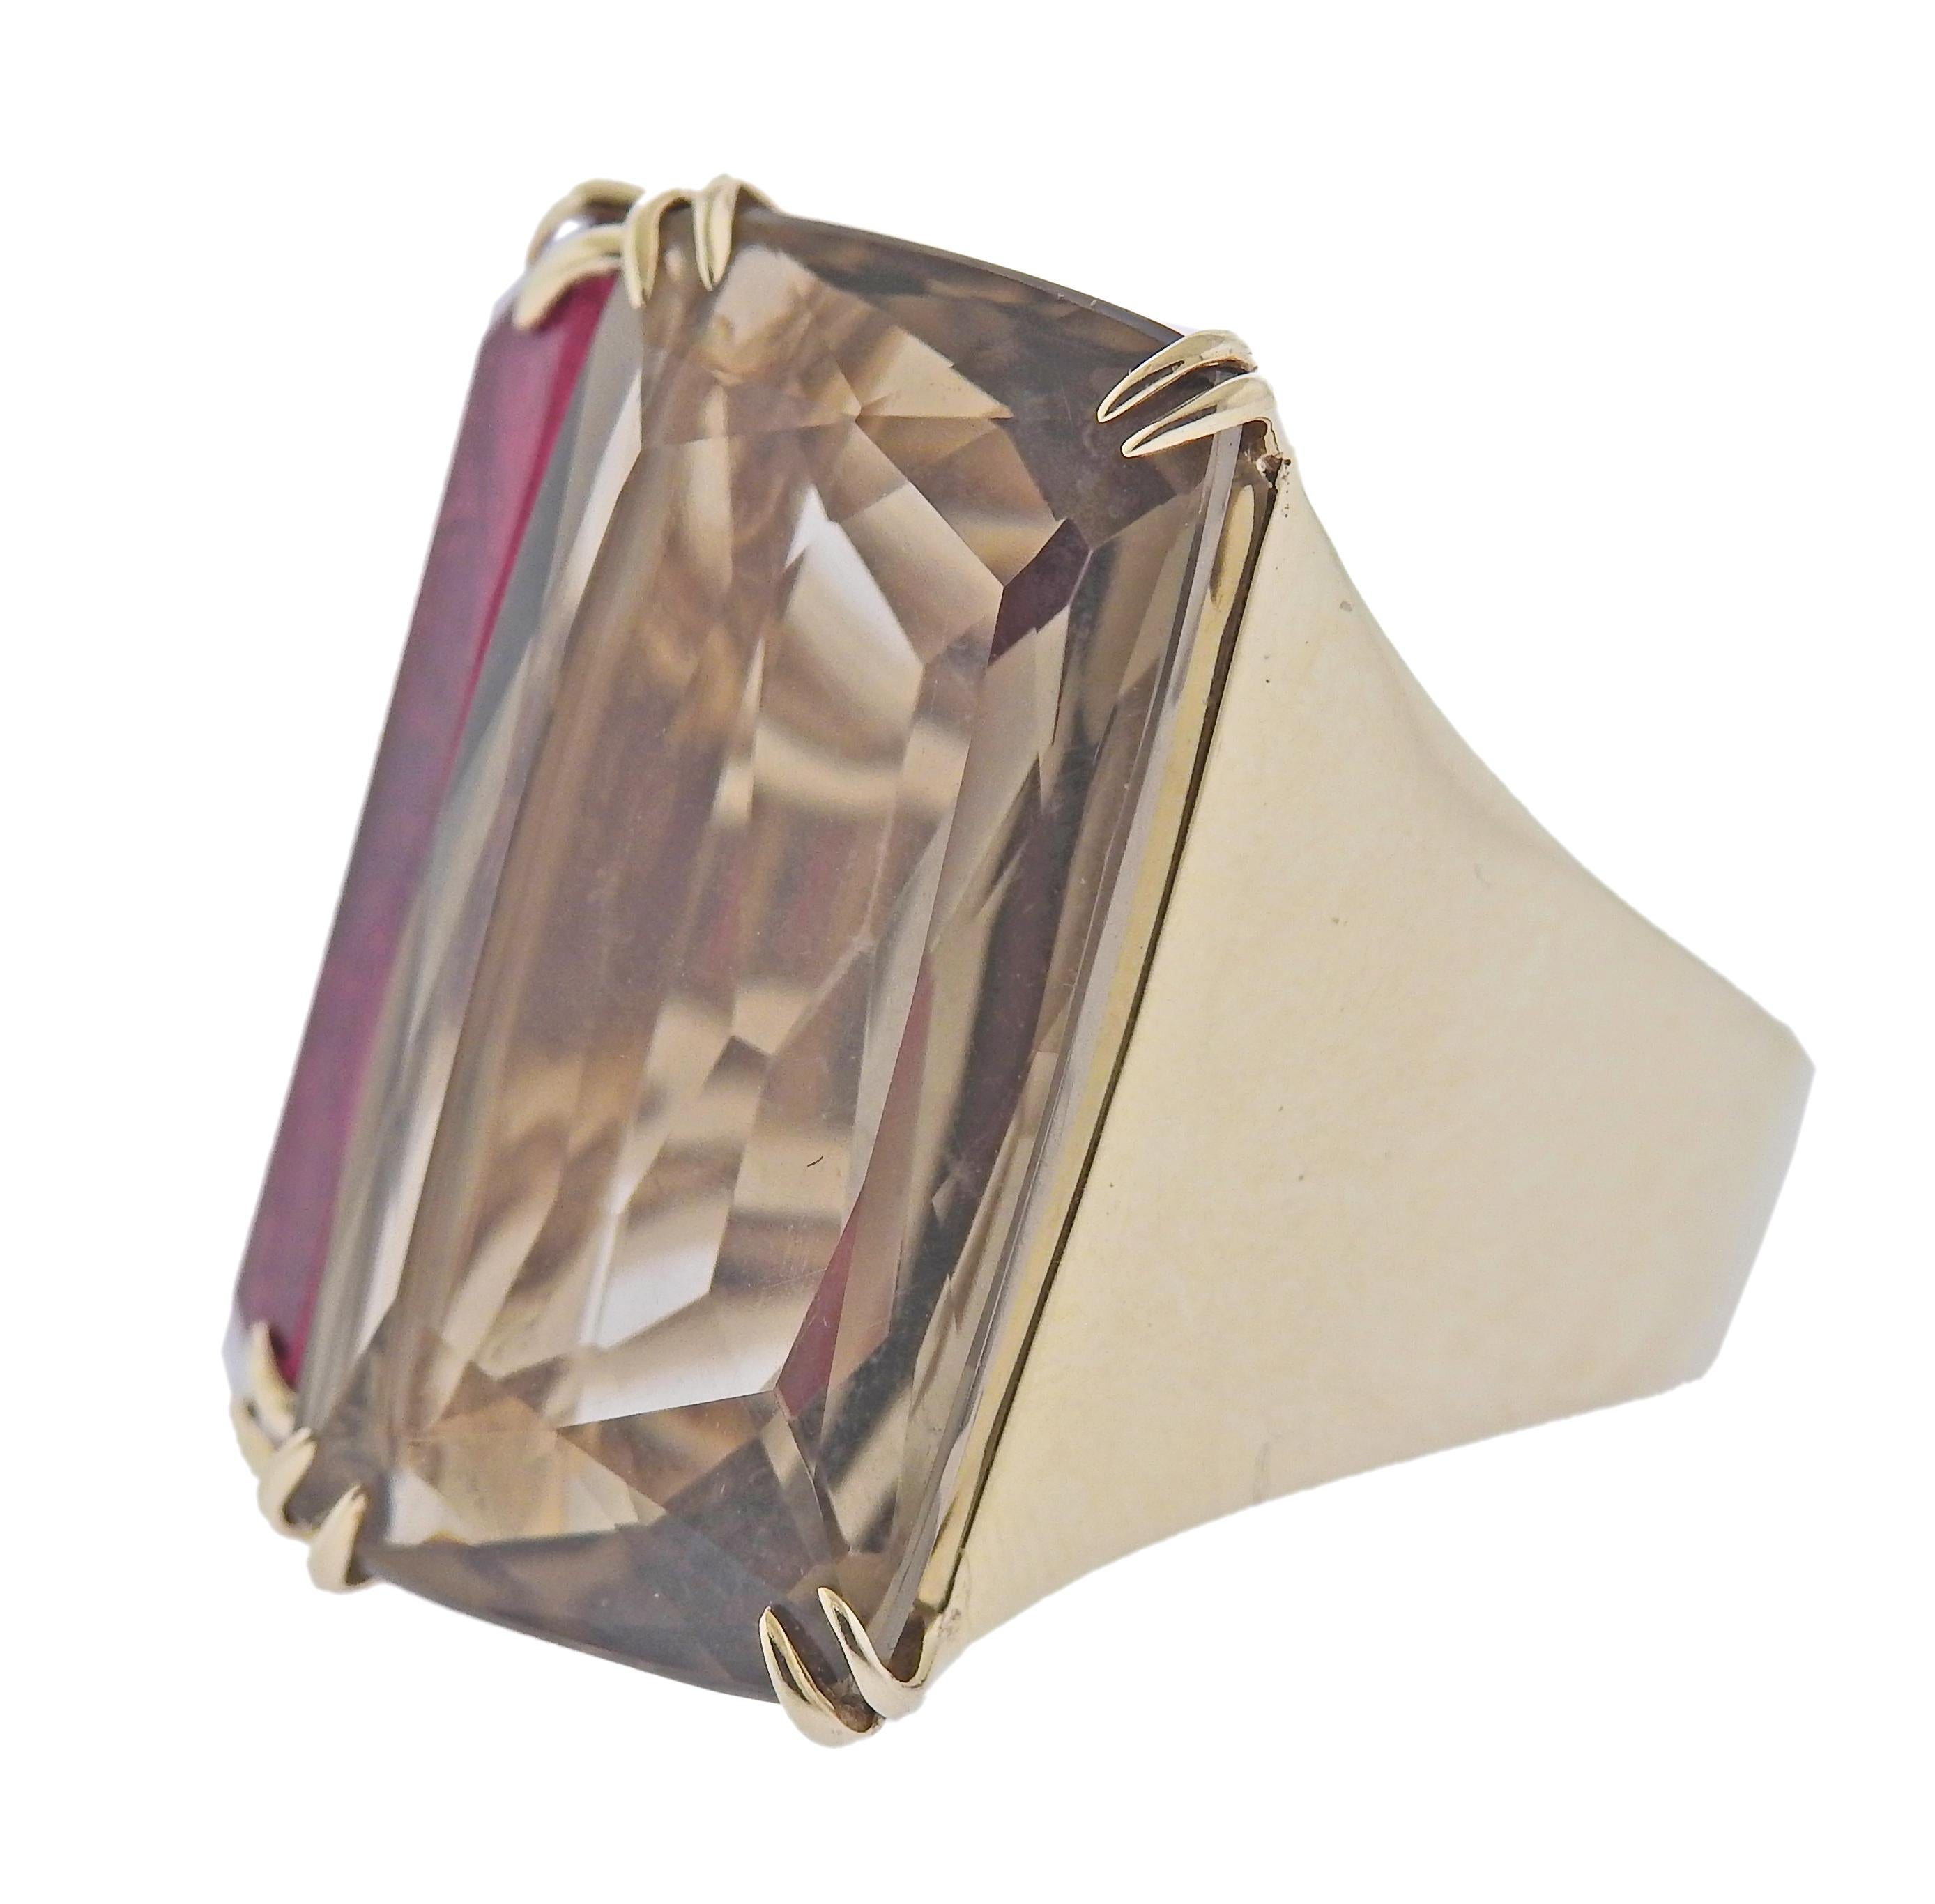 18k gold Cobblestone cocktail ring by H. Stern, with pink tourmaline, Smokey quartz and 0.09ctw H/Vs diamonds.  Ring size 7.5 (EU 56) , top is 26 x 25mm. Marked 2 M, 750, S hallmark. Weight 23 grams. 